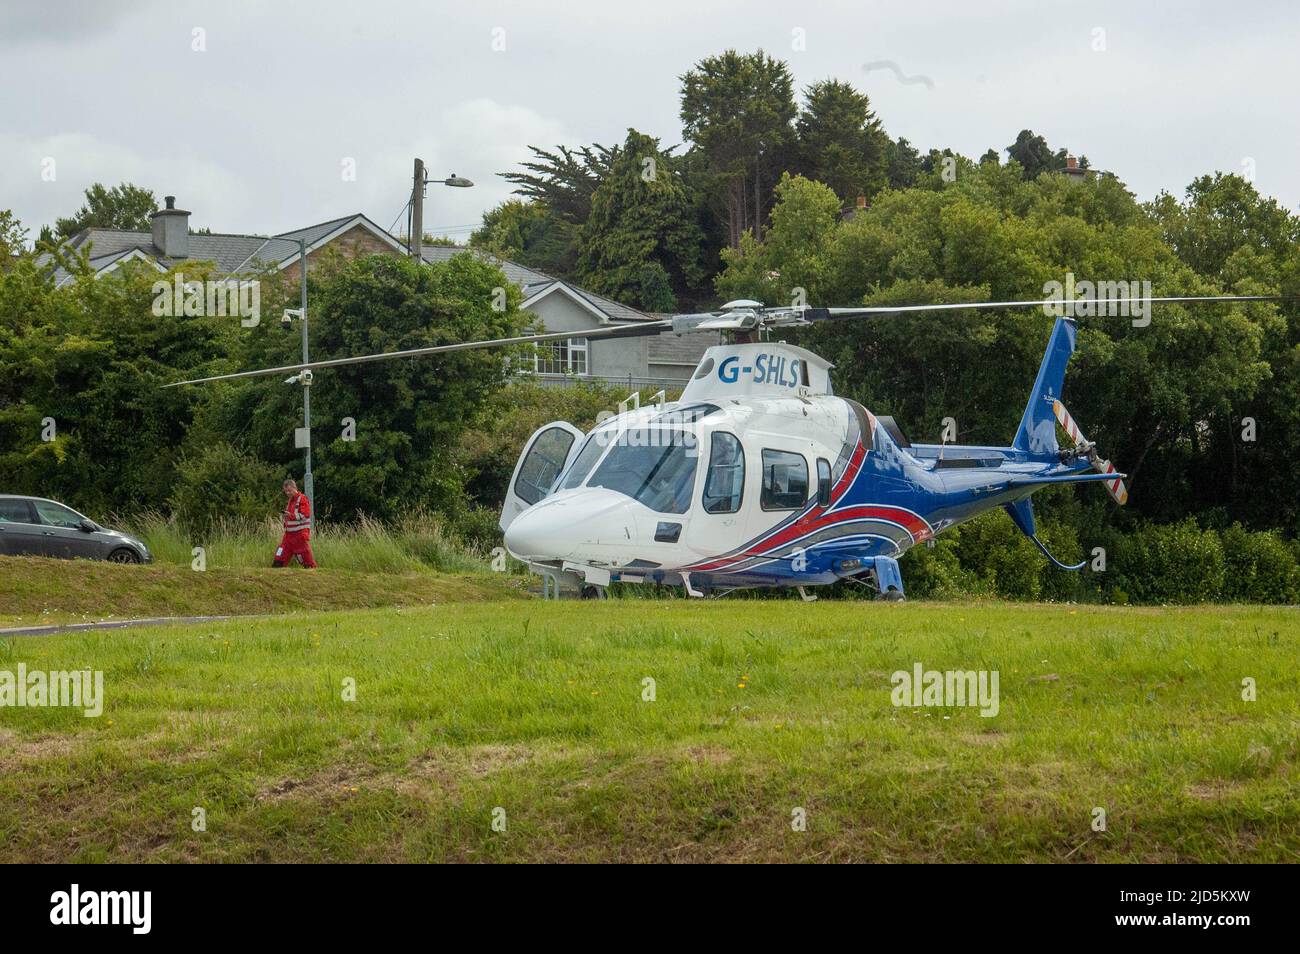 Bantry, West Cork, Ireland, Saturday, Juny 18, 2022; The Irish Community Air Ambulance landed at Bantry General Hospital to bring it's medical crew to an incident. The charity relys on public donations to fund the service with each mission costing about €3,500. Credit ED/Alamy Live News Stock Photo